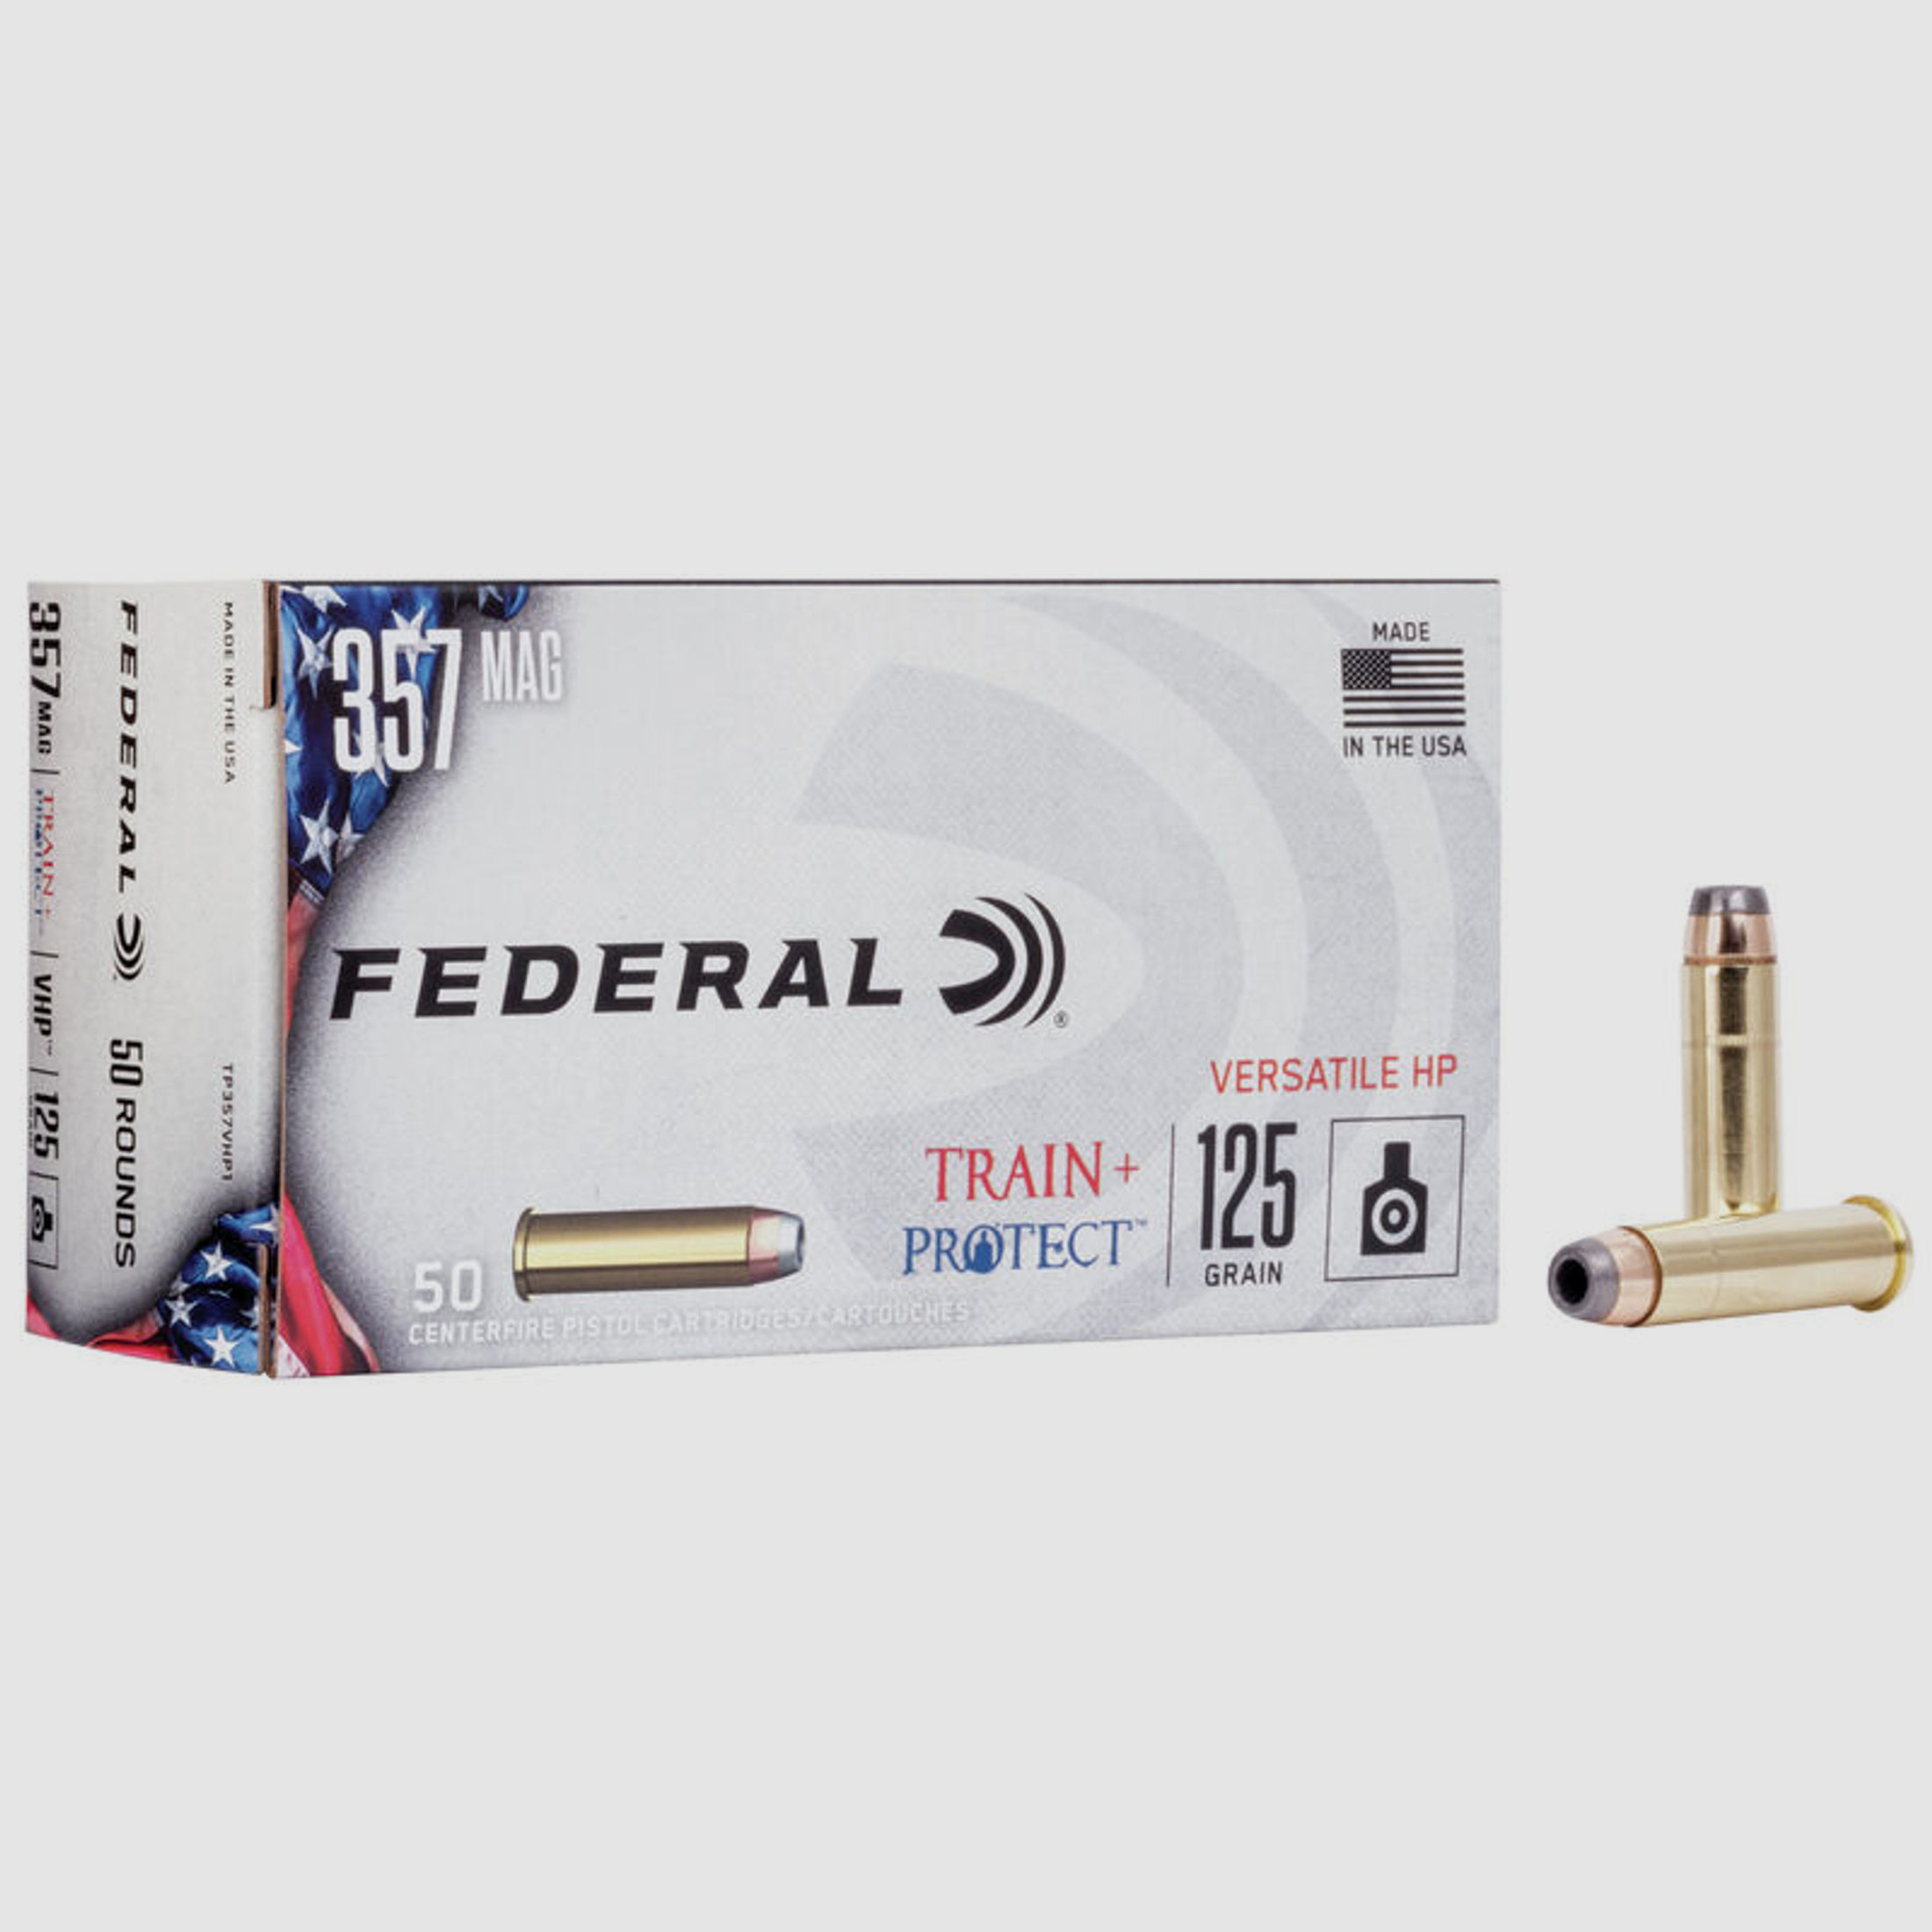 Federal Train+Project .357 Mag. 125GR VHP 50 Patronen